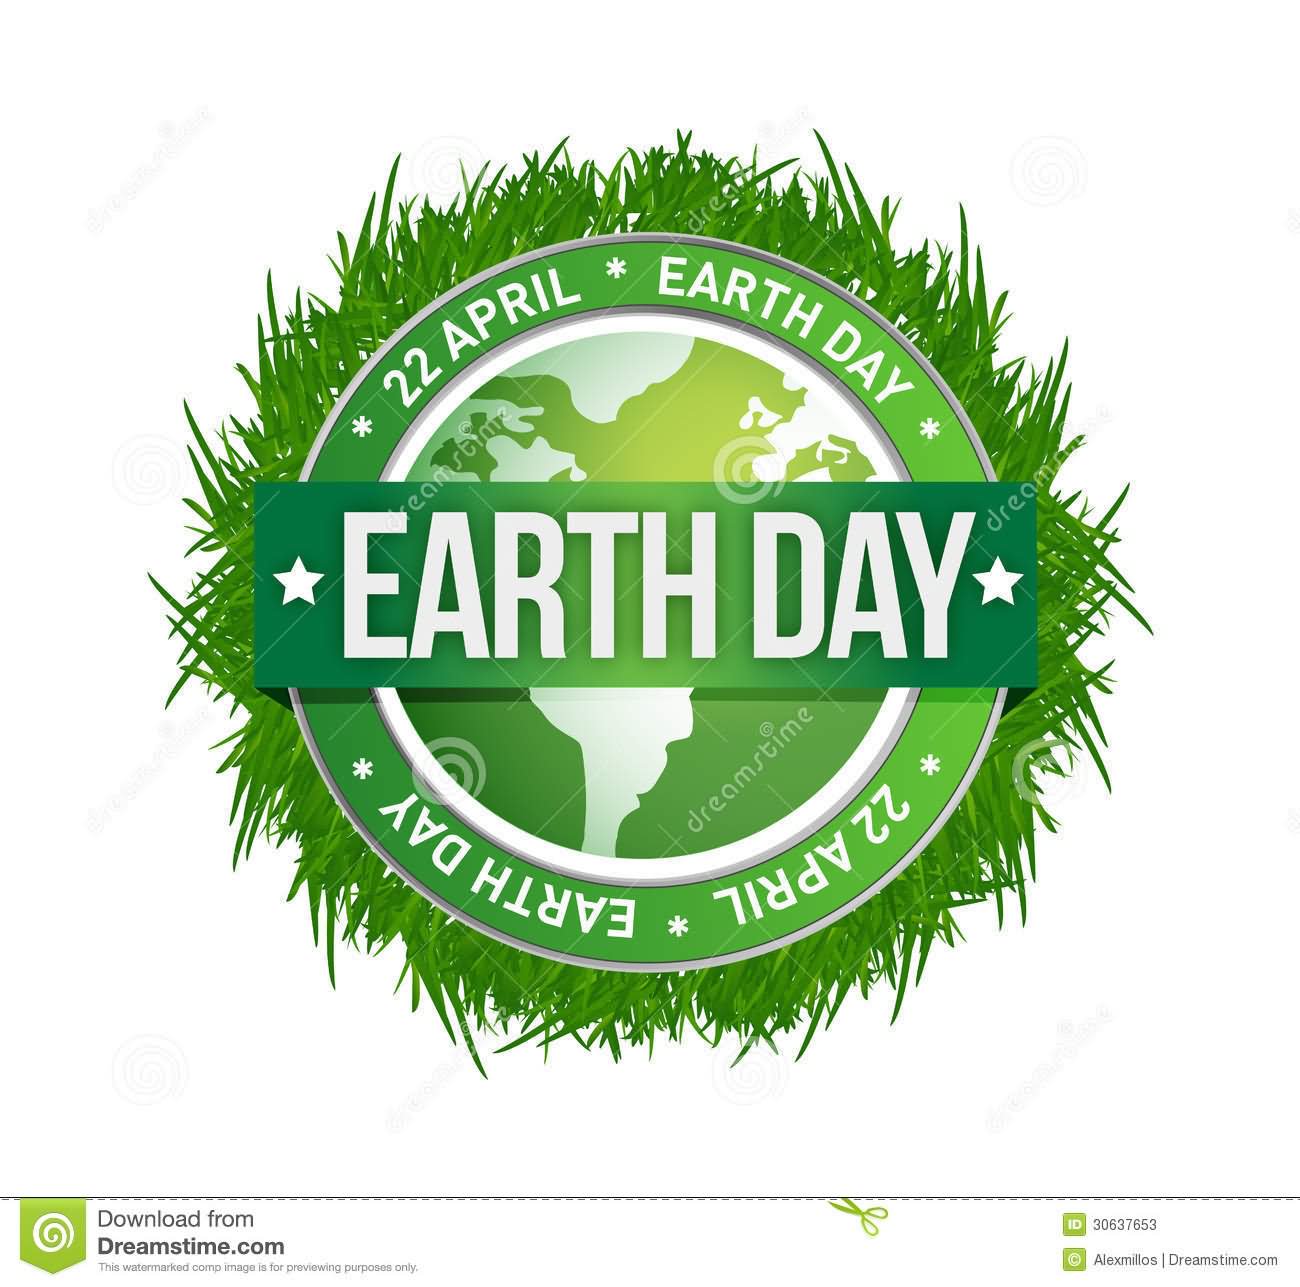 Happy Earth Day 22 April 2016